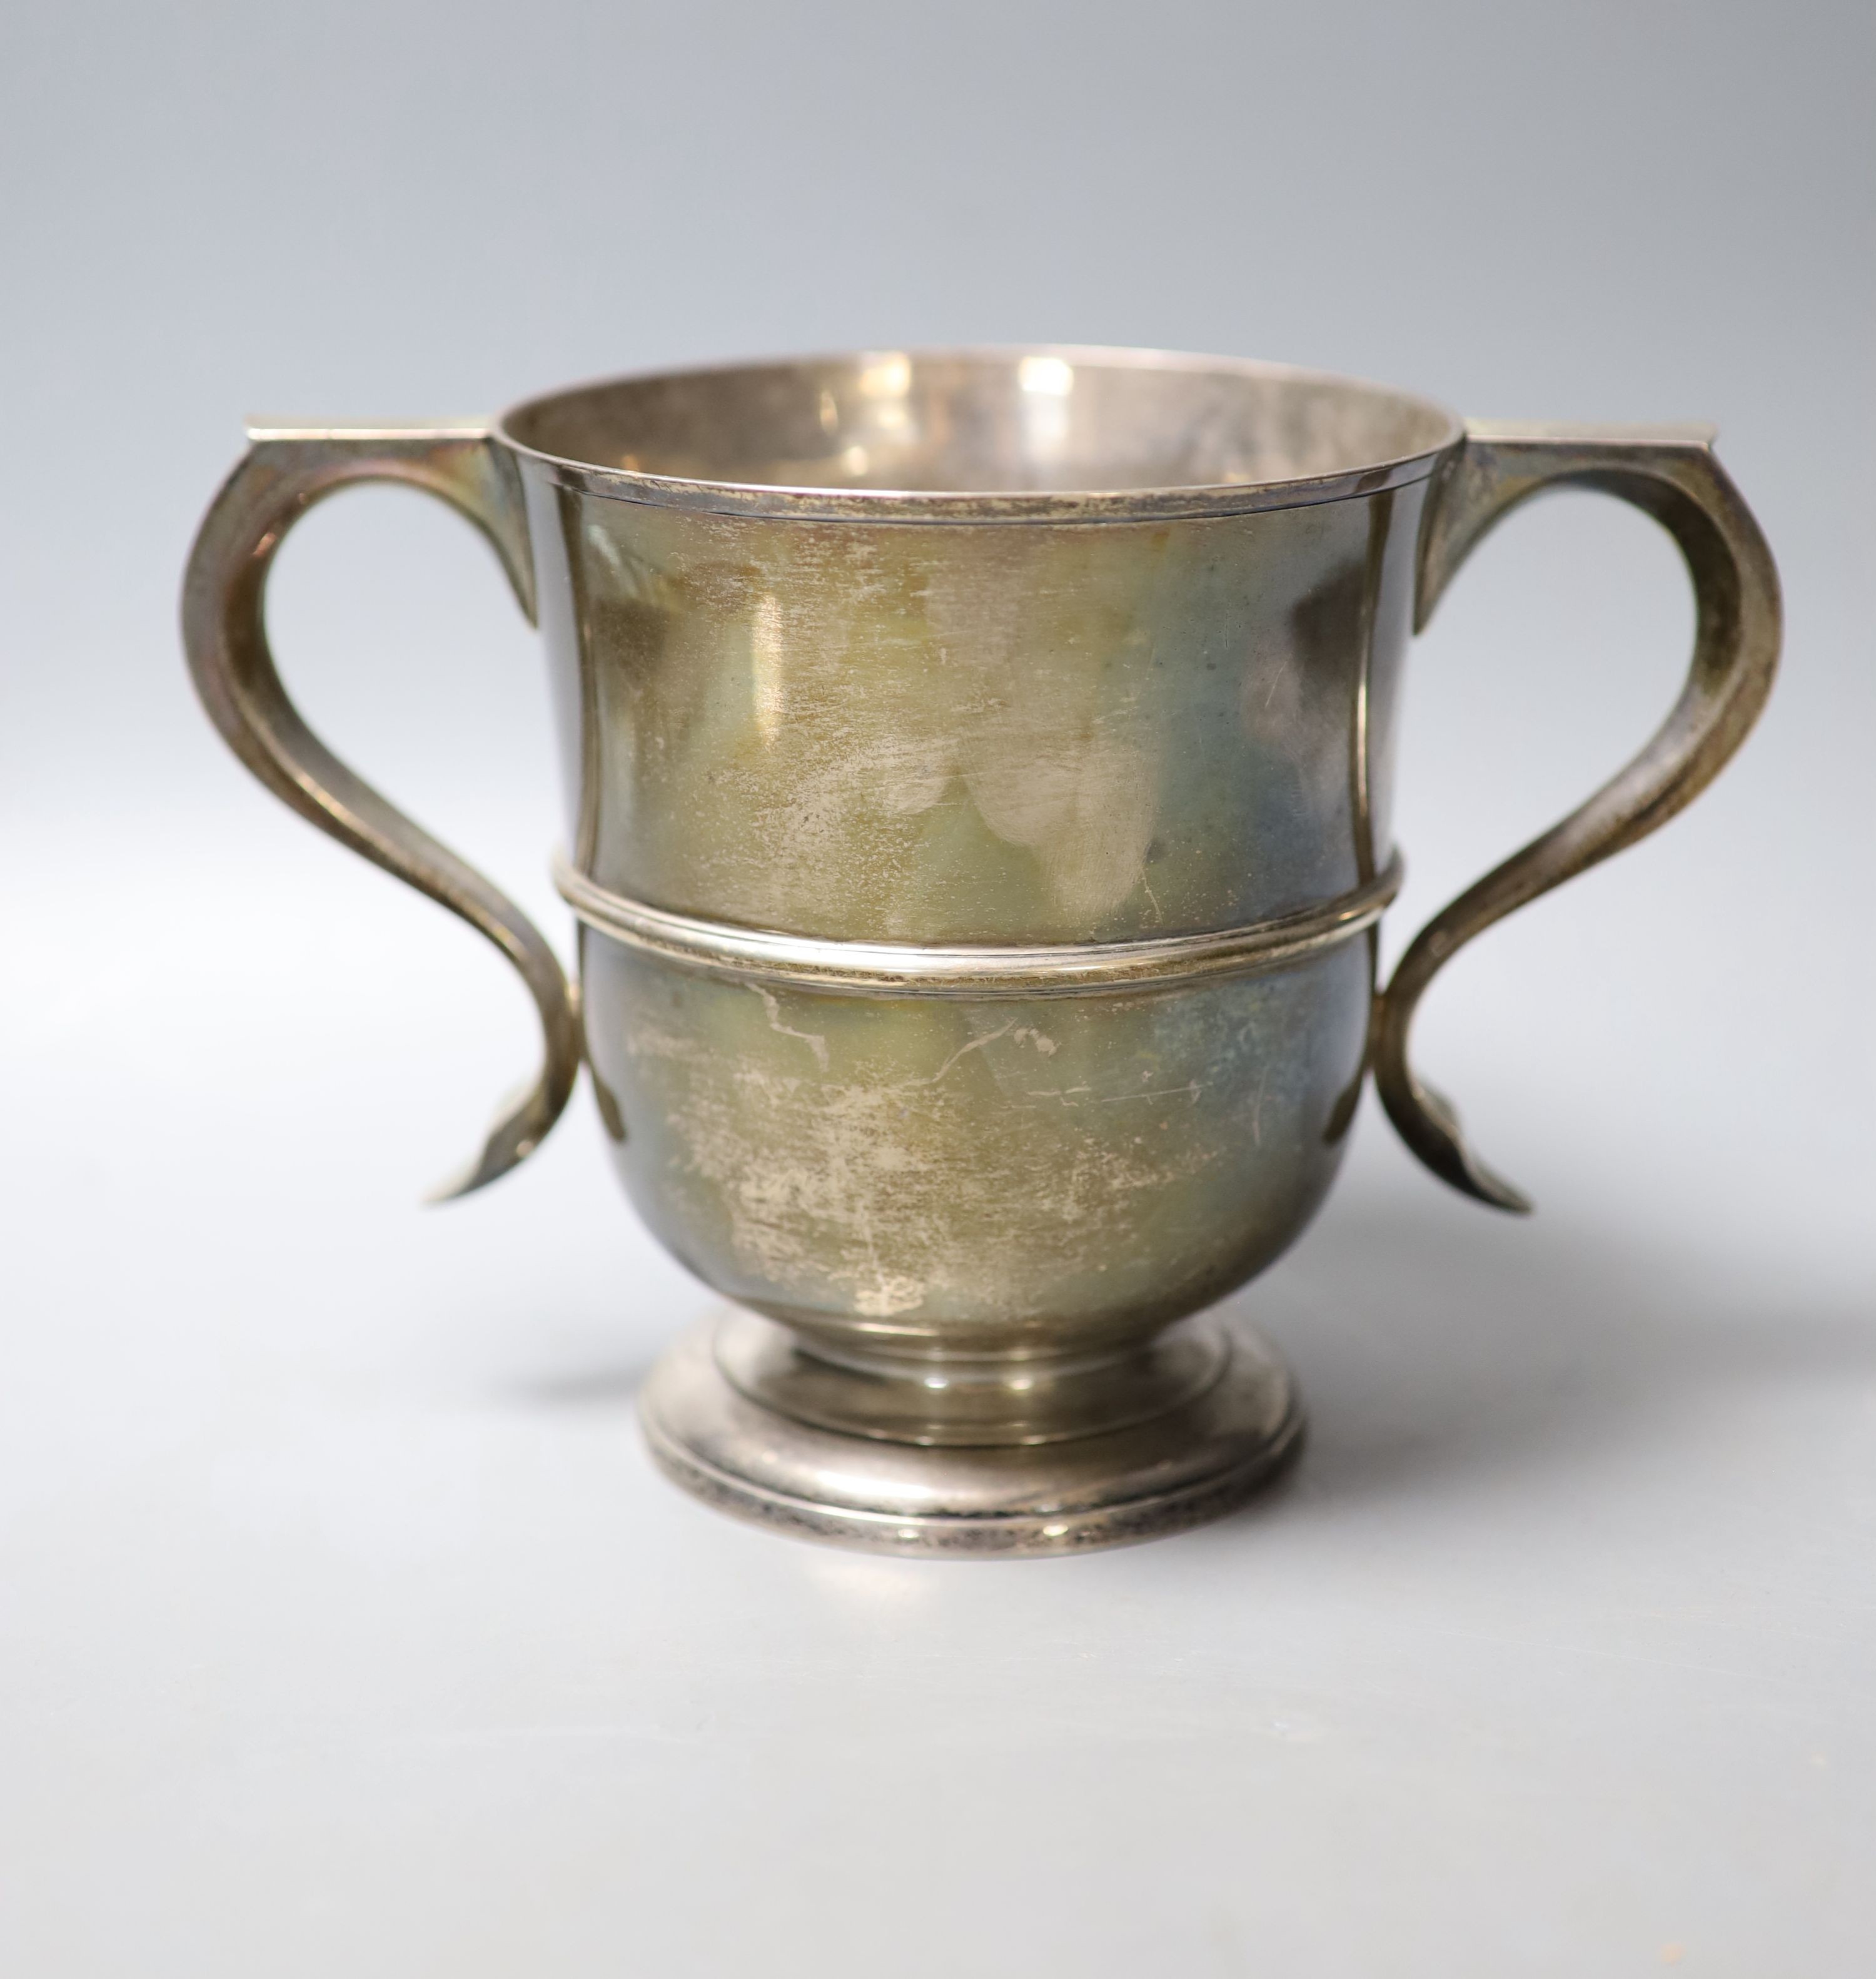 An Edwardian silver two handled trophy cup, with banded girdle, Robert Dicker, London, 1904, height 14.4cm, 19.5oz.